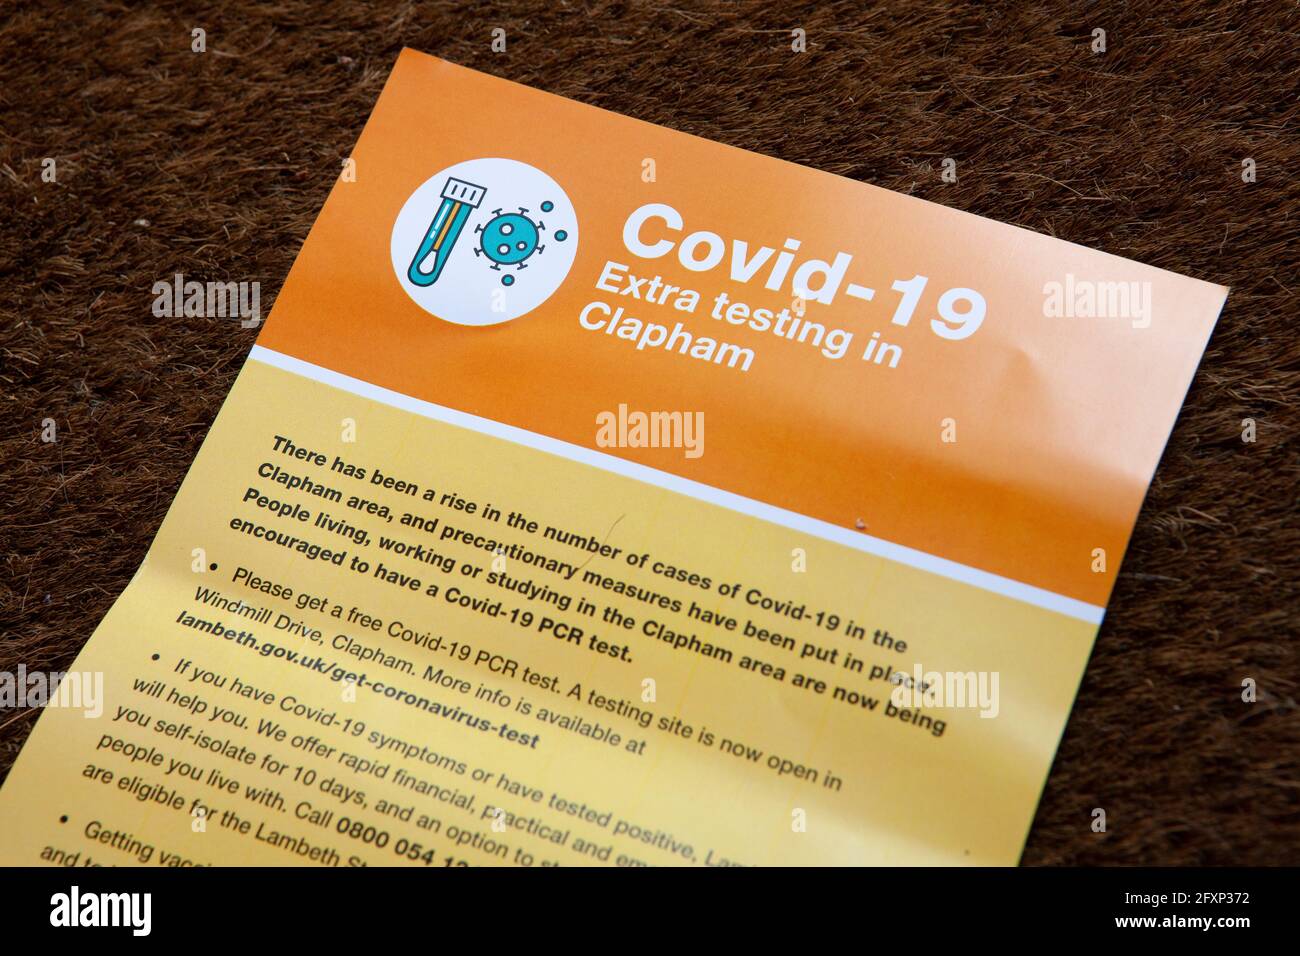 London, UK, 27 May 2021: Due to cases of the India variant of coronavirus in a local school, homes in the area have been sent leaflets by Lambeth Council asking residents to take a PCR test. A temporary centre for collecting kits has been set up on Clapham Common's Windmill Drive. Anna Watson/Alamy Live News Stock Photo